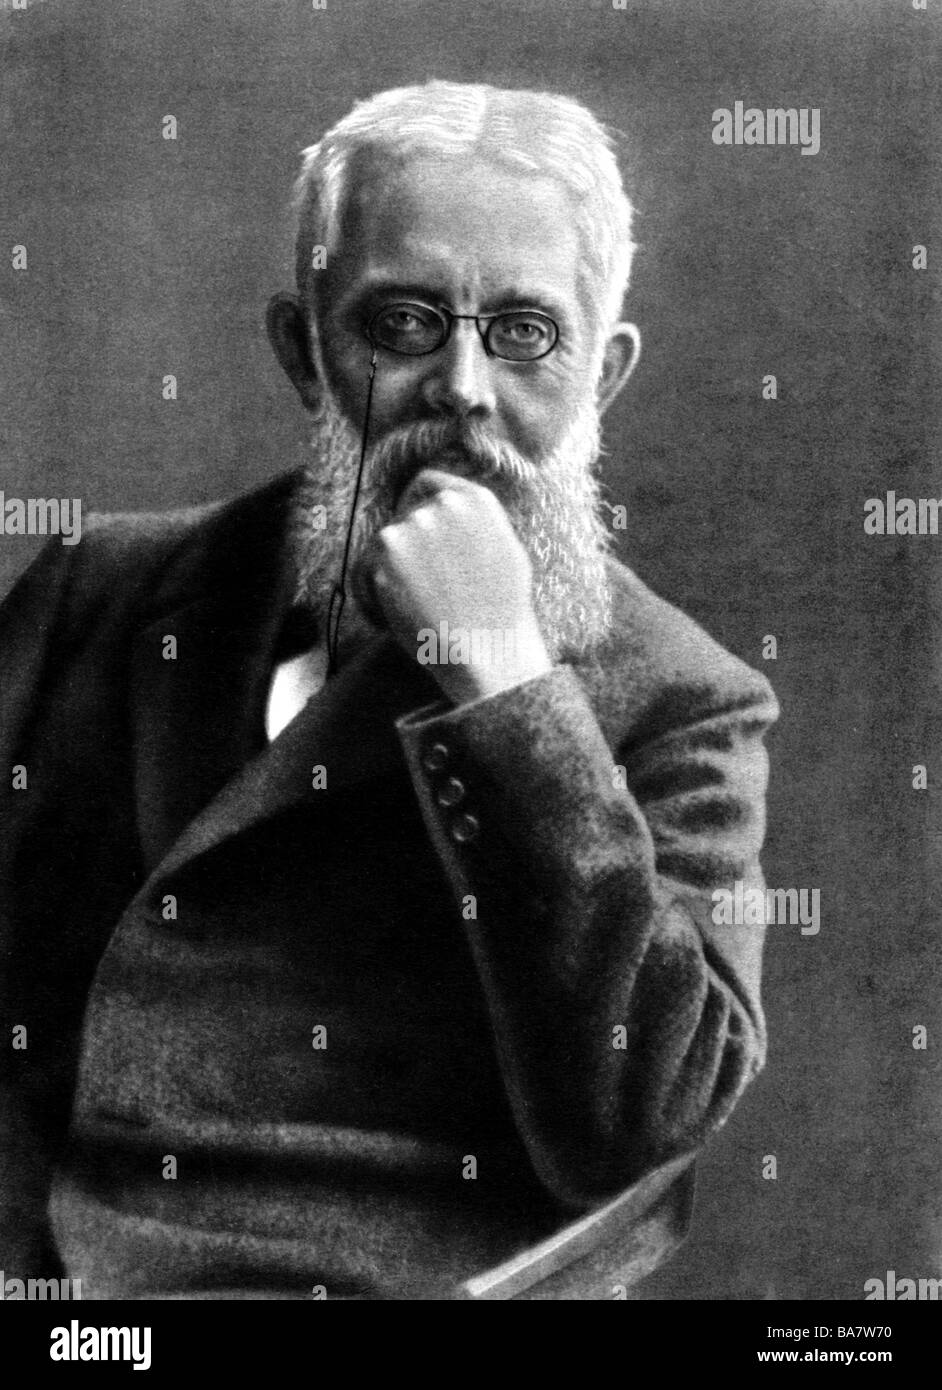 Mehring, Franz, 27.2.1846 - 28.1.1919, German author / writer and politician (SPD), half length, after photography, early 20th century, , Stock Photo